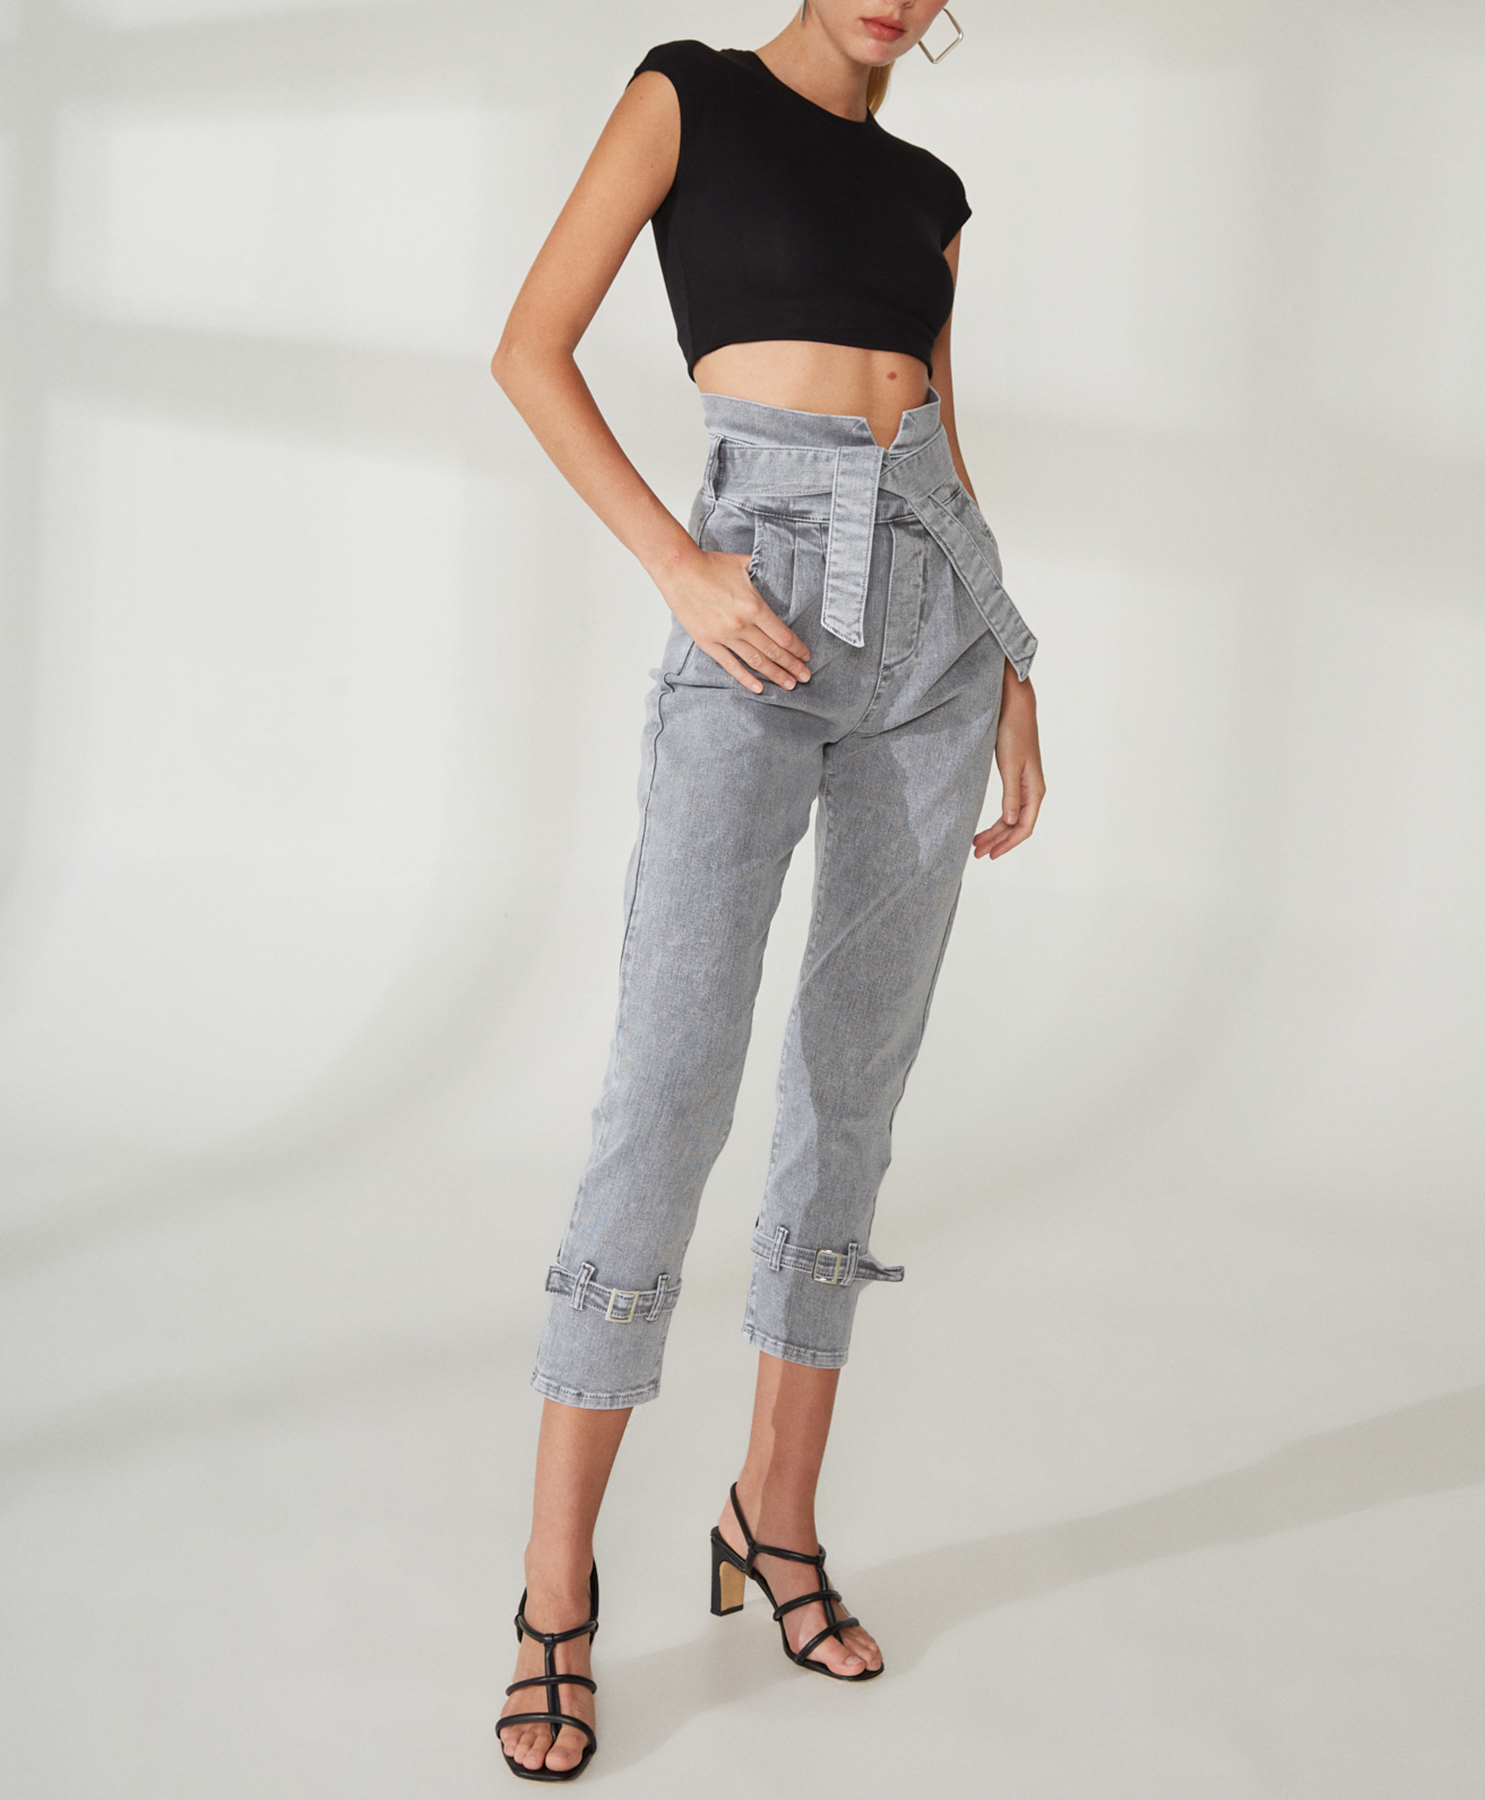 RG-204 High waist metal buckle detailed anthracite jeans